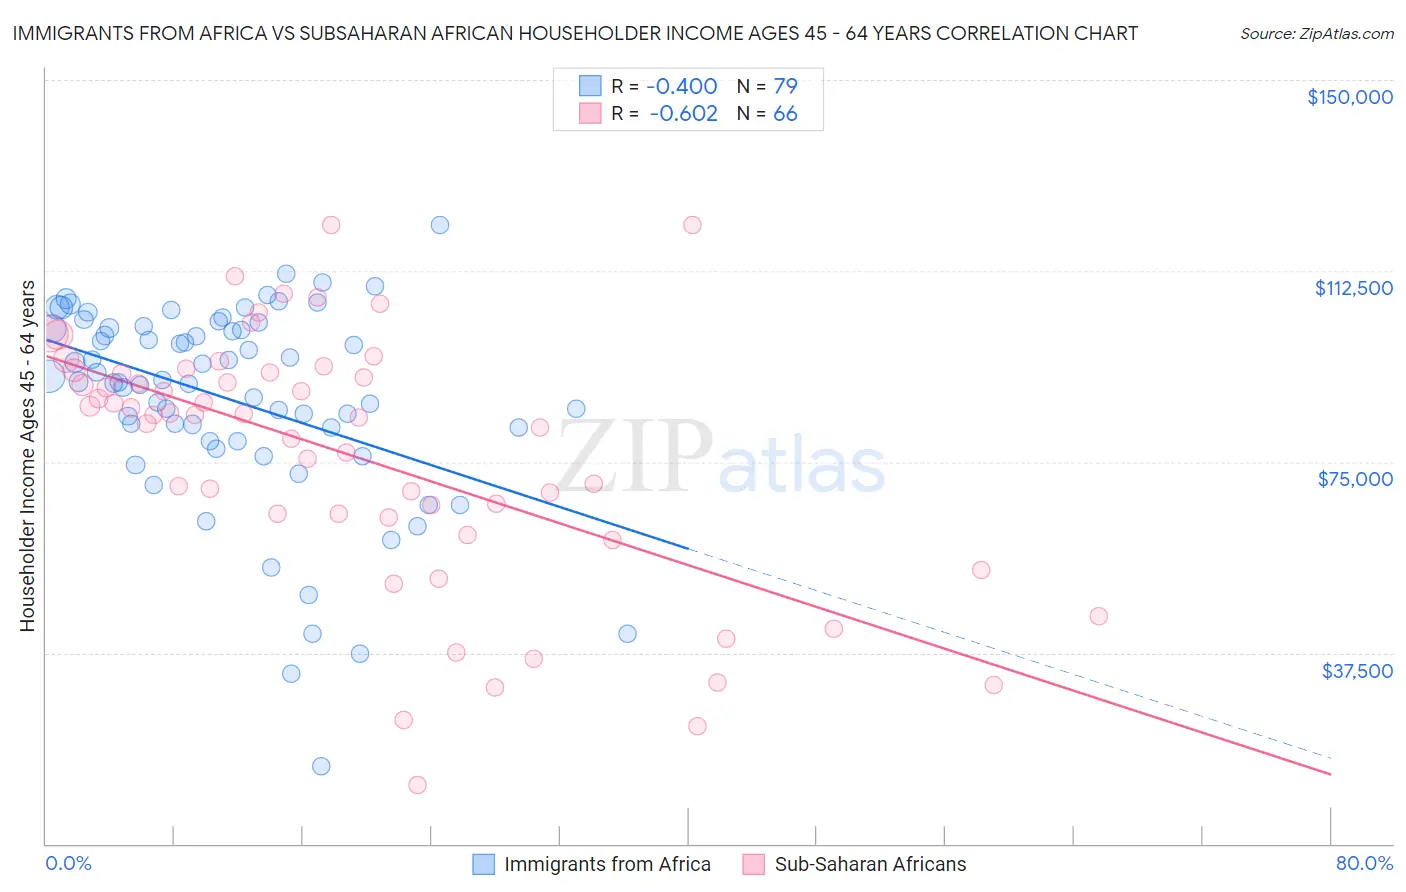 Immigrants from Africa vs Subsaharan African Householder Income Ages 45 - 64 years